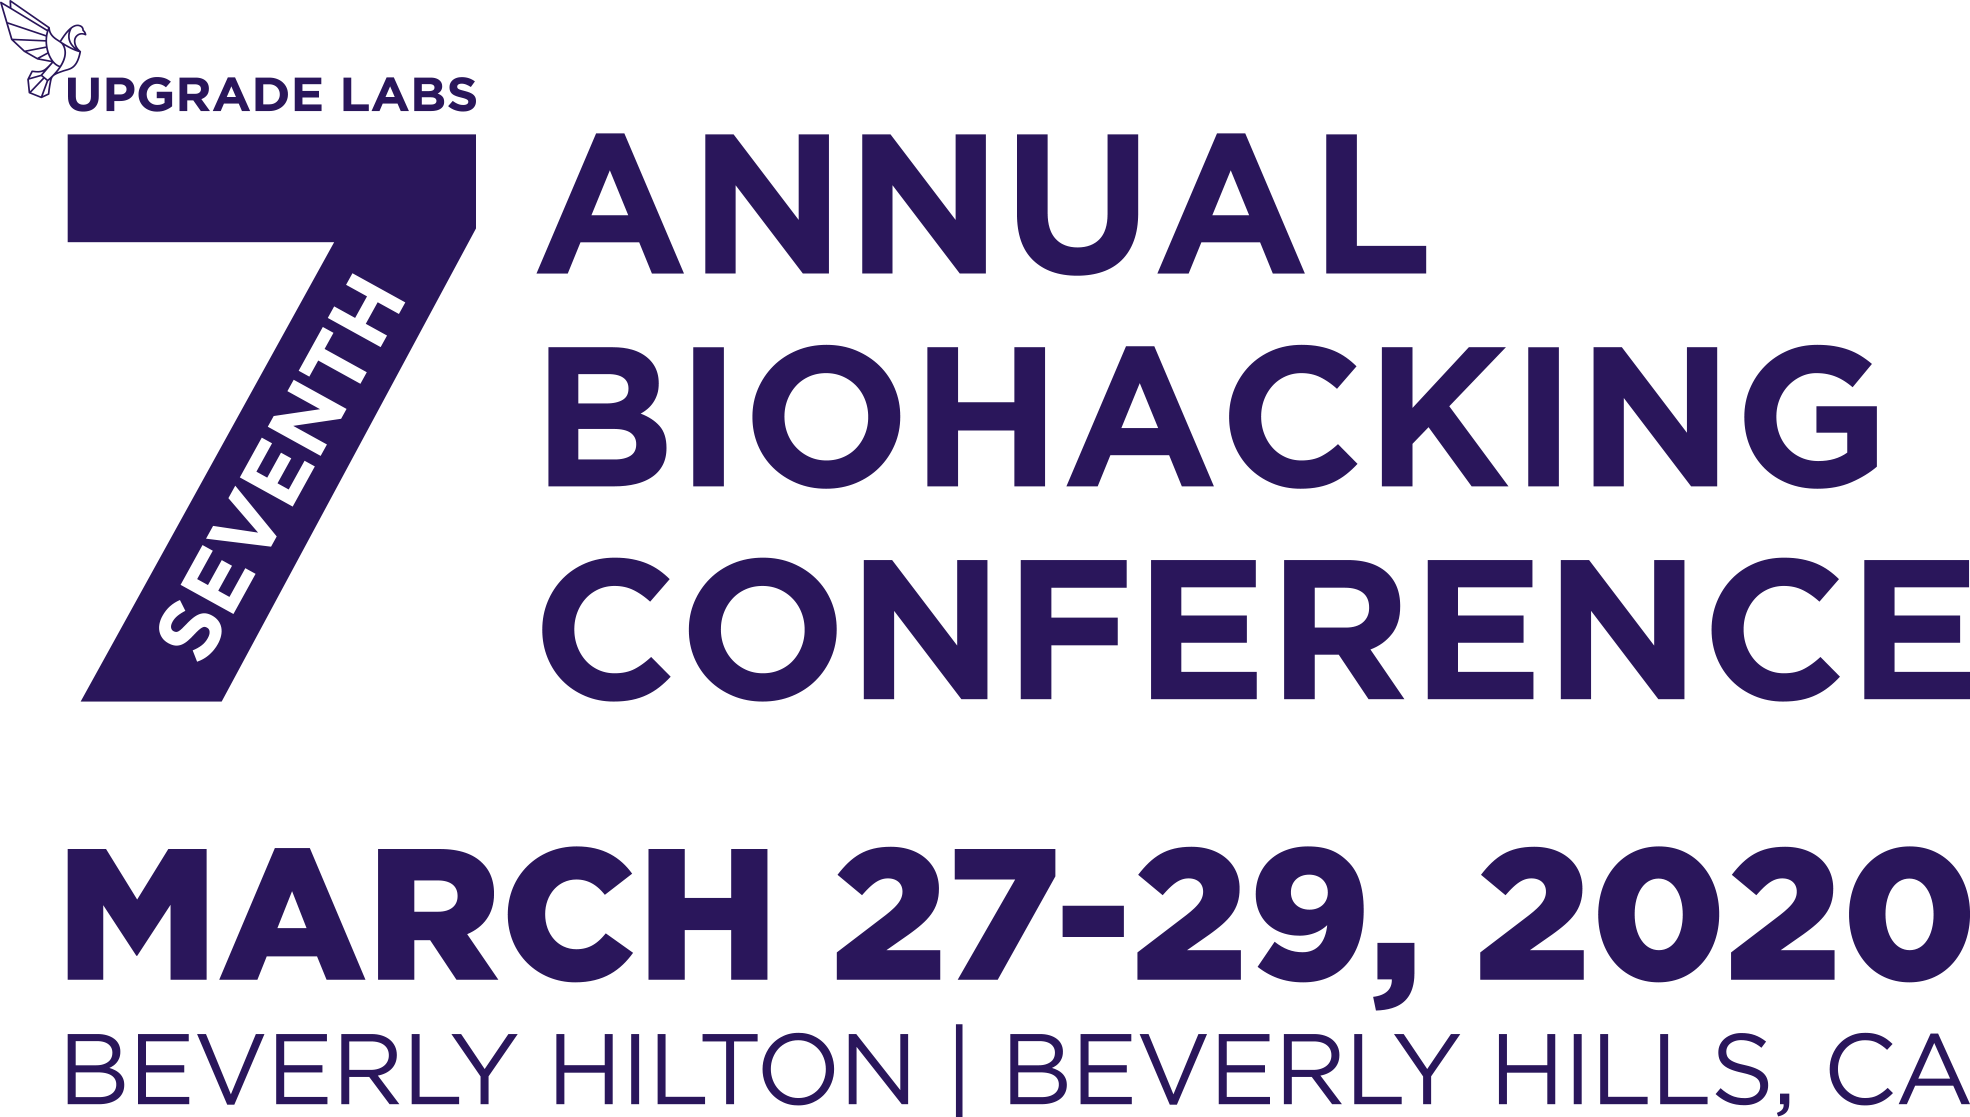 World's Largest Biohacking Conference, Upgrade XP, Returns to Beverly